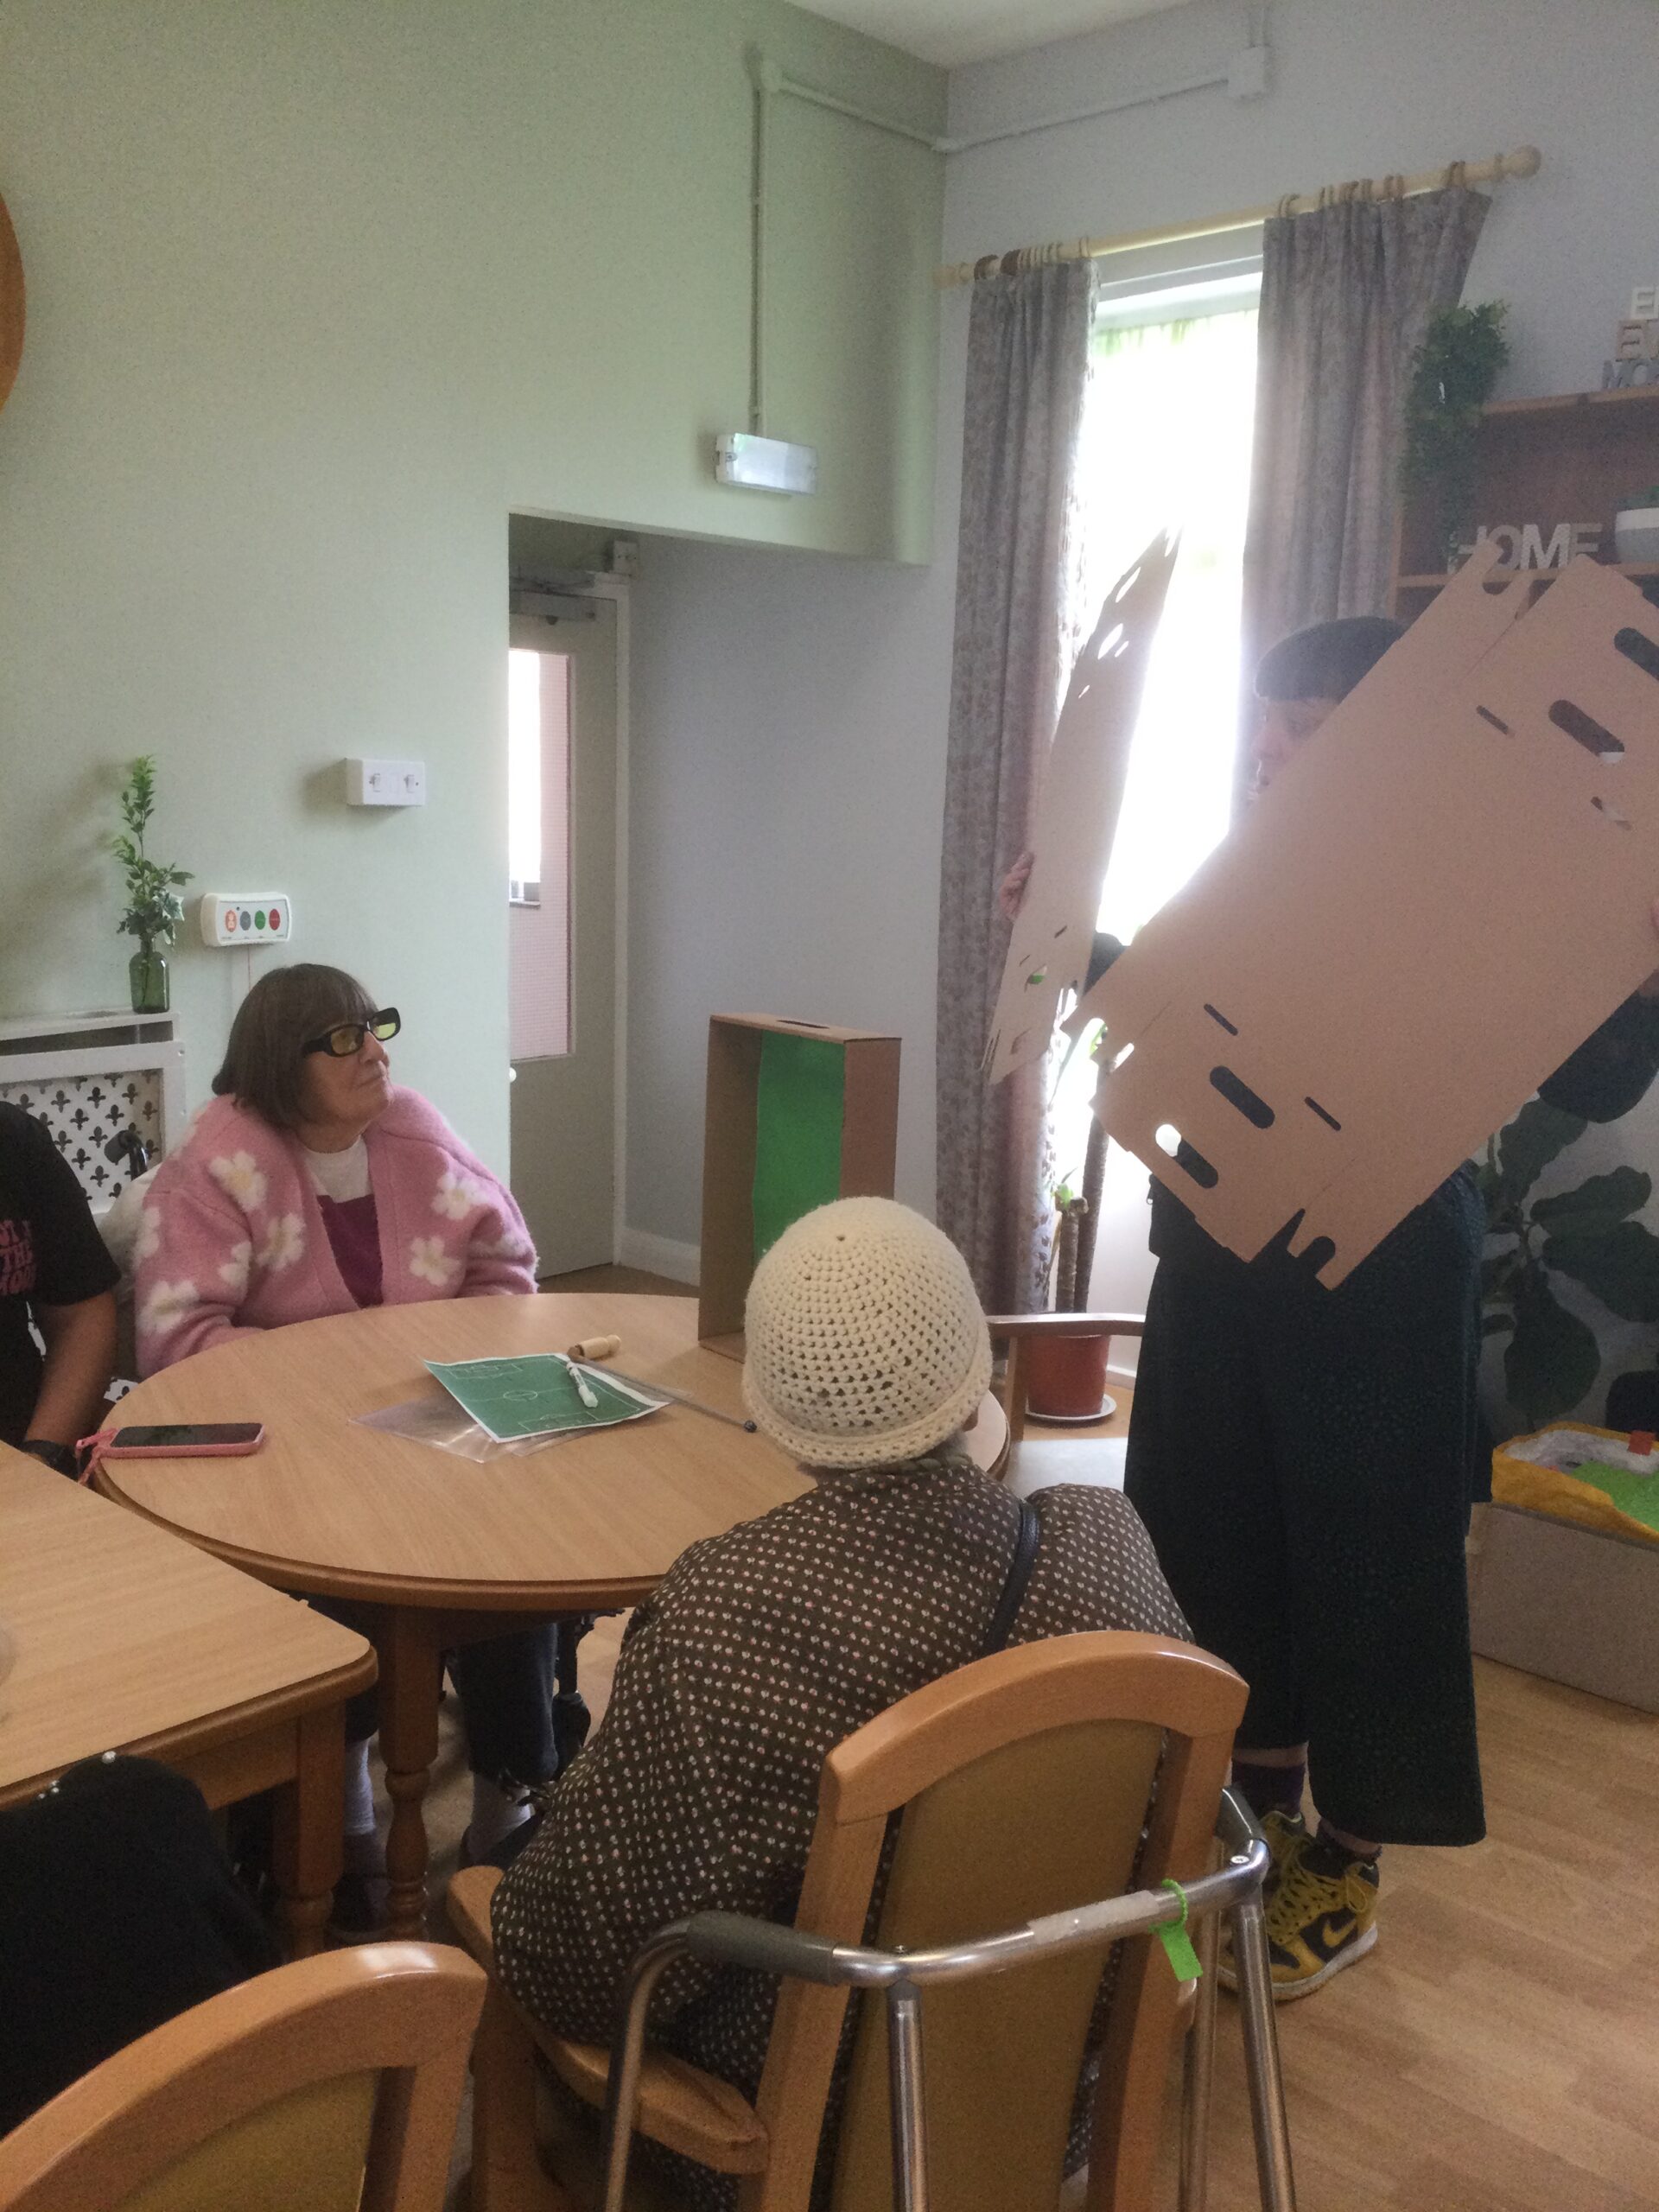 A person holding up a flat piece of cardboard showing it to people seated at a table